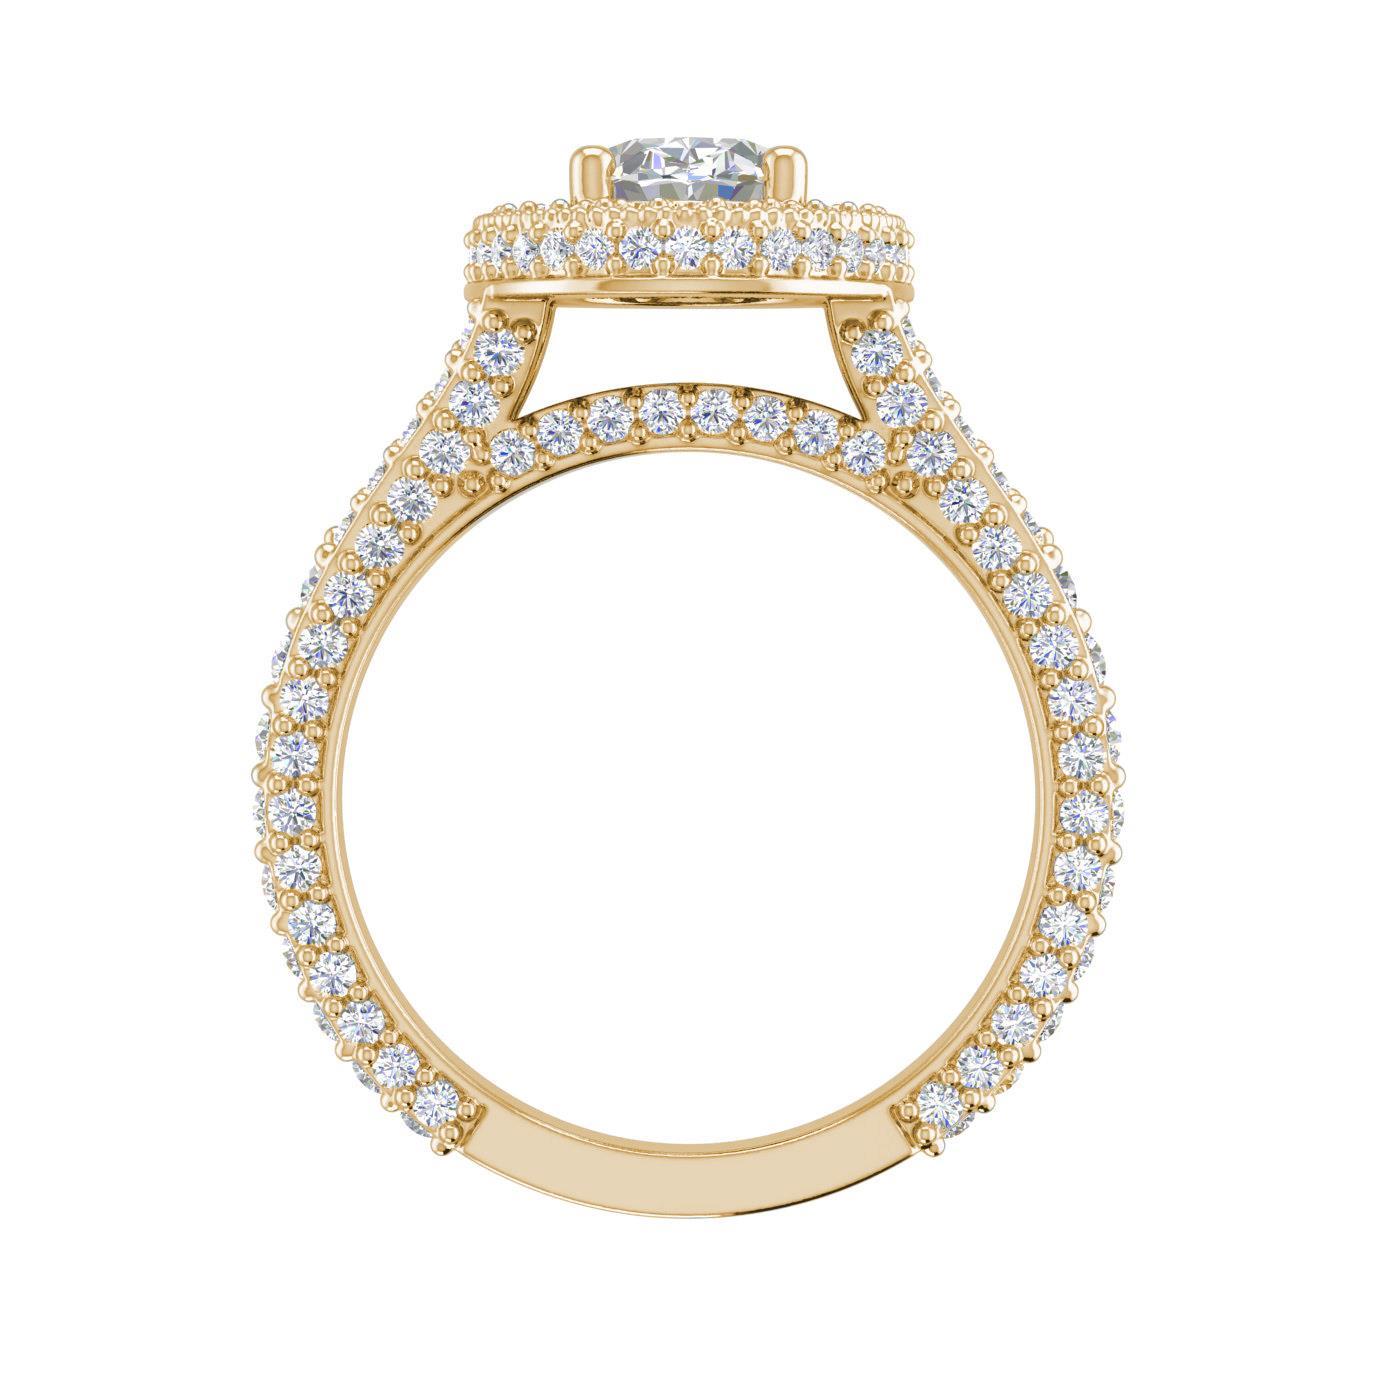 Pave Halo 3 35 Carat Si1 D Oval Cut Diamond Engagement Ring Yellow Gold